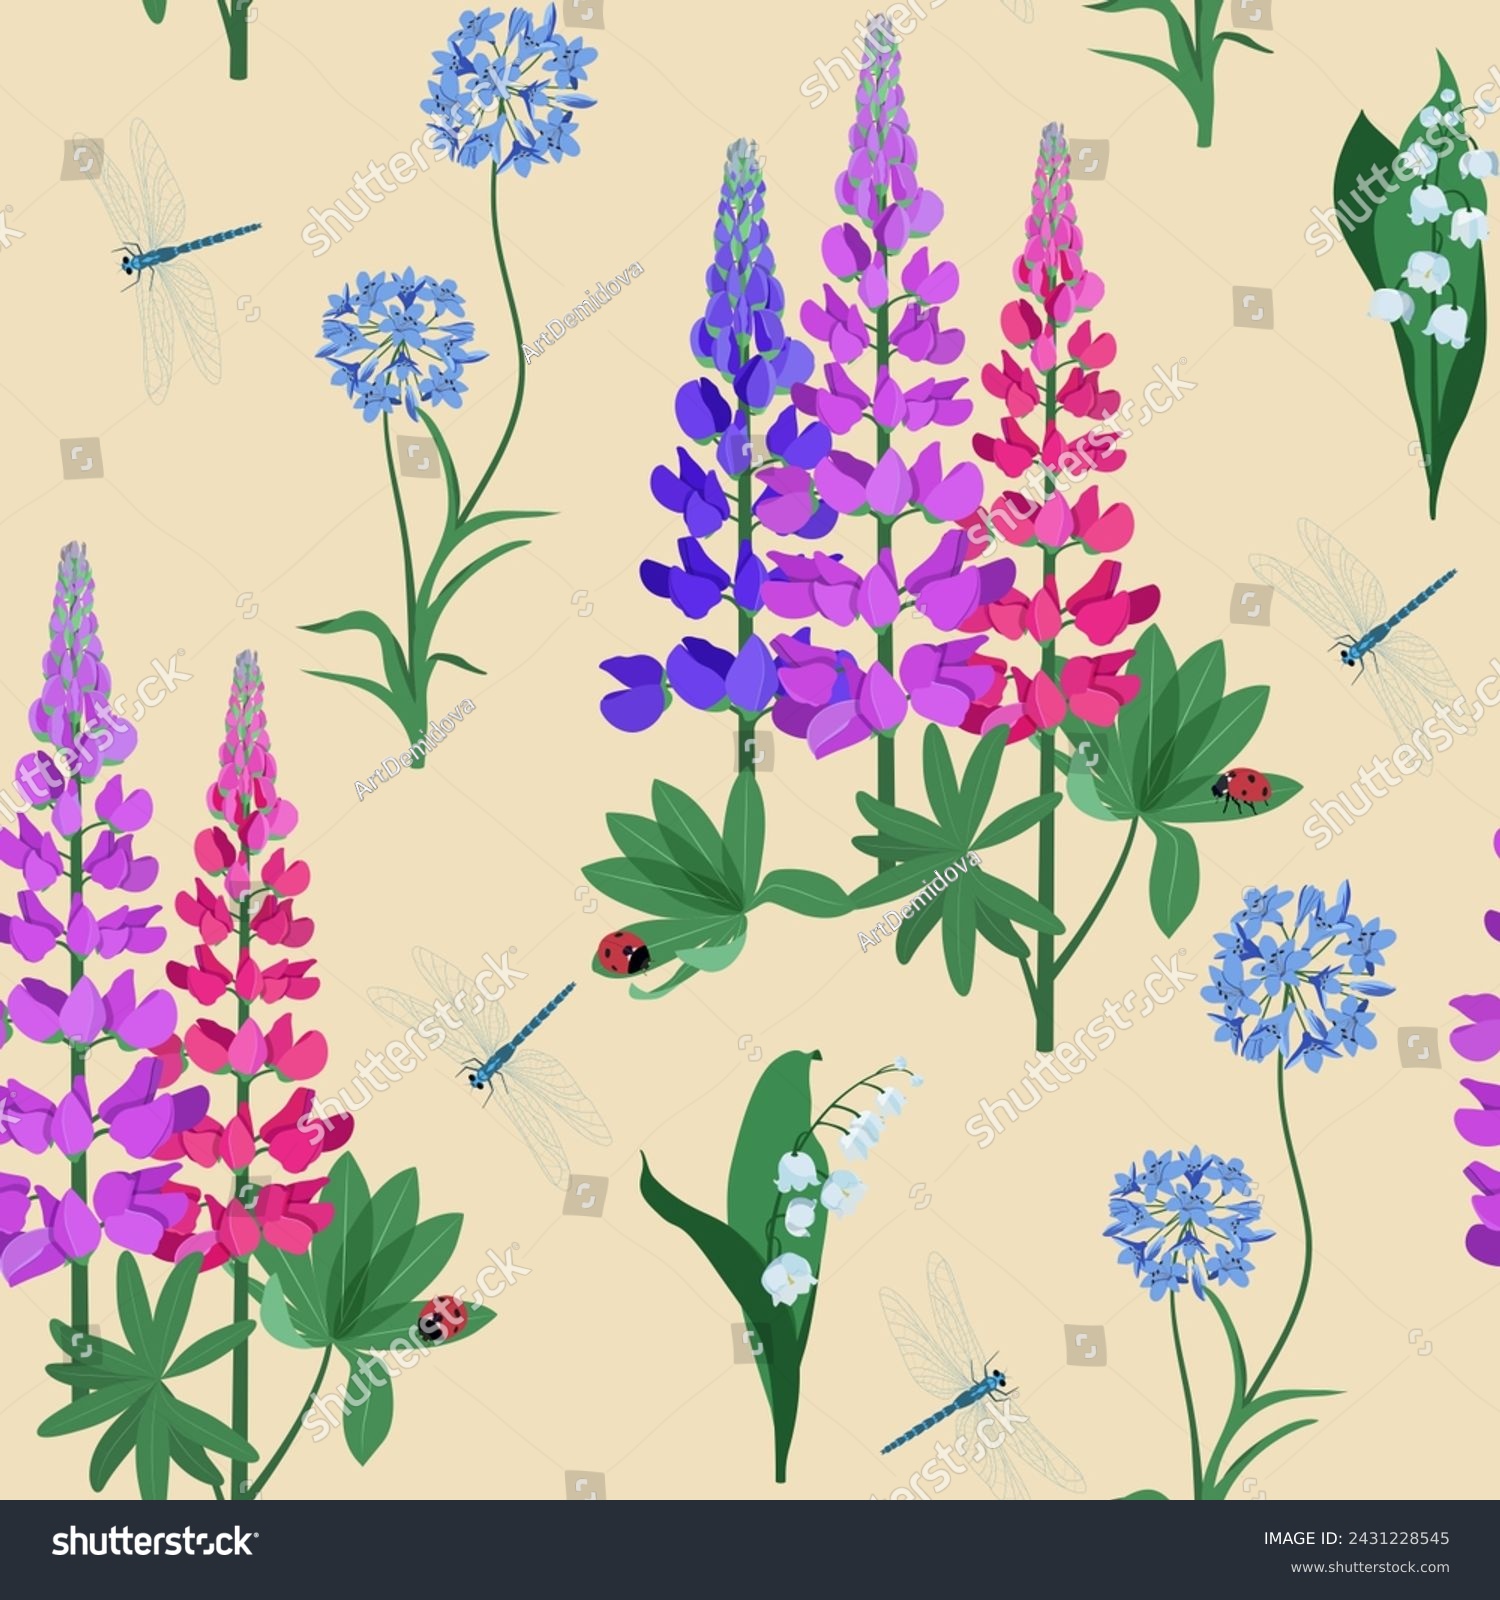 SVG of Seamless pattern. Blue agapanthus flower pattern, lupines, ladybirds and dragonflies on a beige background. This pattern can be used for printing on textiles, wallpaper and other surfaces. svg